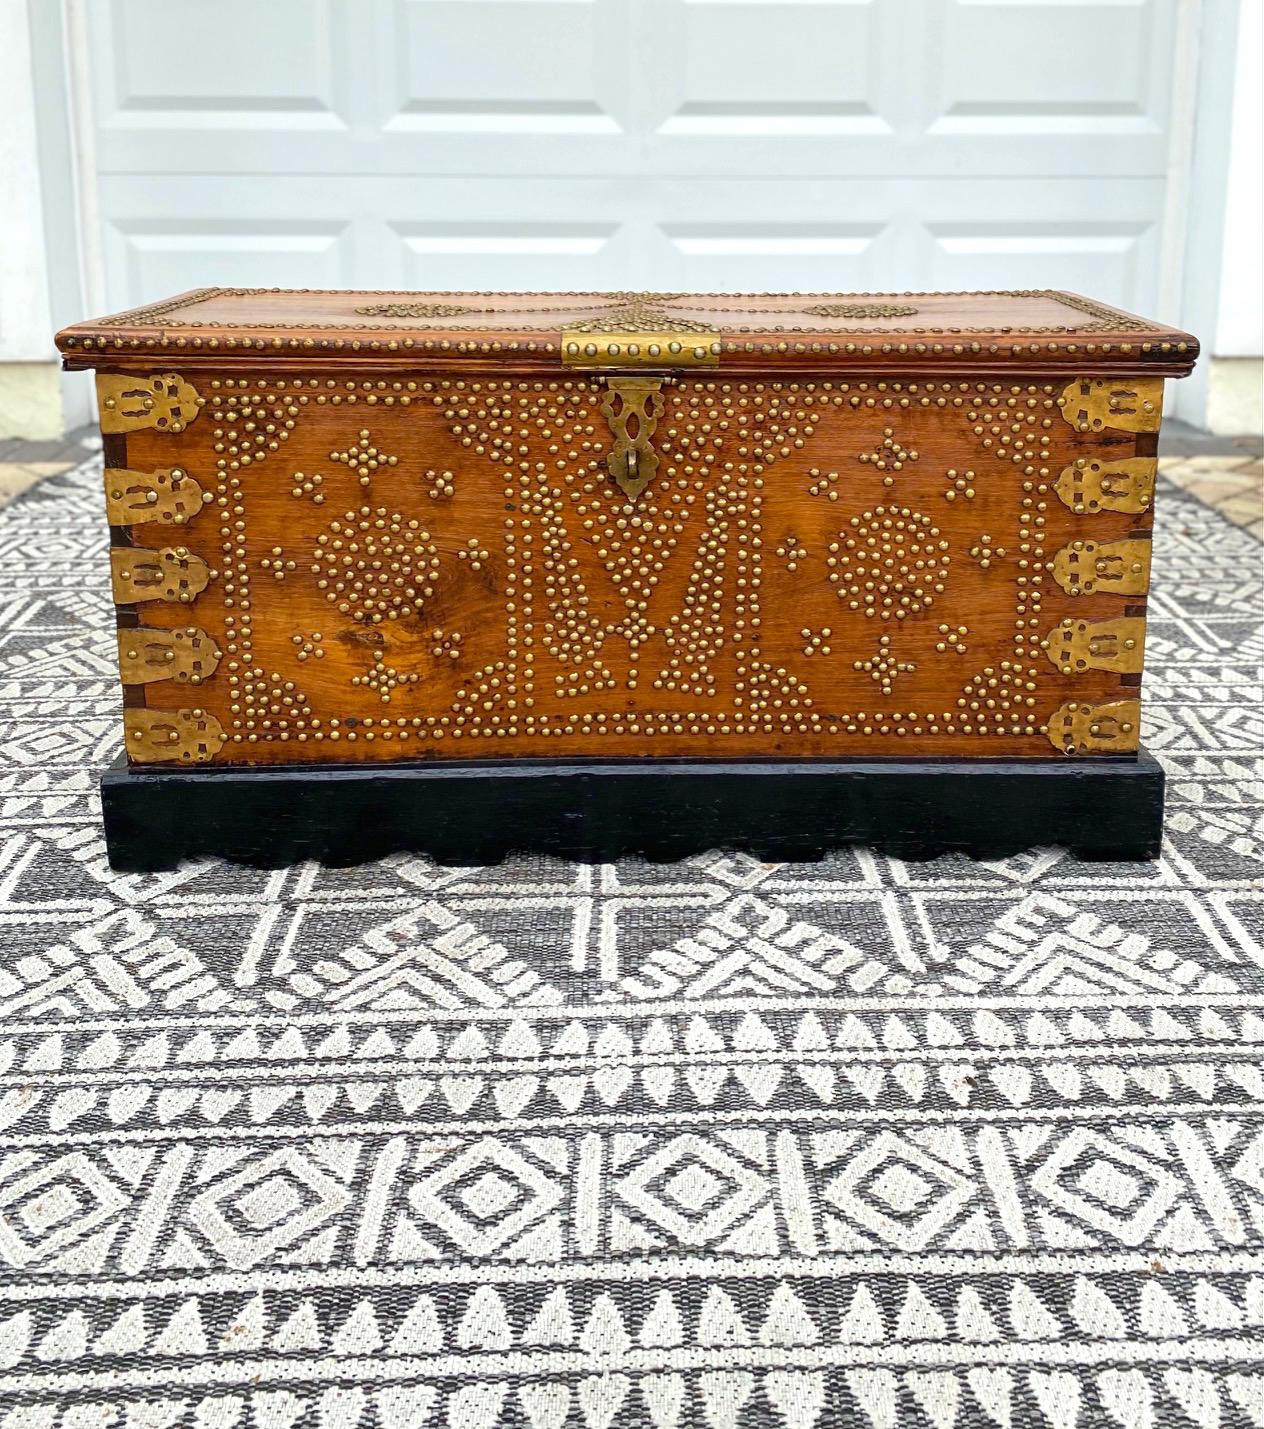 Rare early 20th century handcrafted Zanzibar blanket chest with brass metal overlay and brass studs throughout. The antique trunk is comprised of solid carved teak wood and features ornate brass interior hinges. The interior is also fitted with a